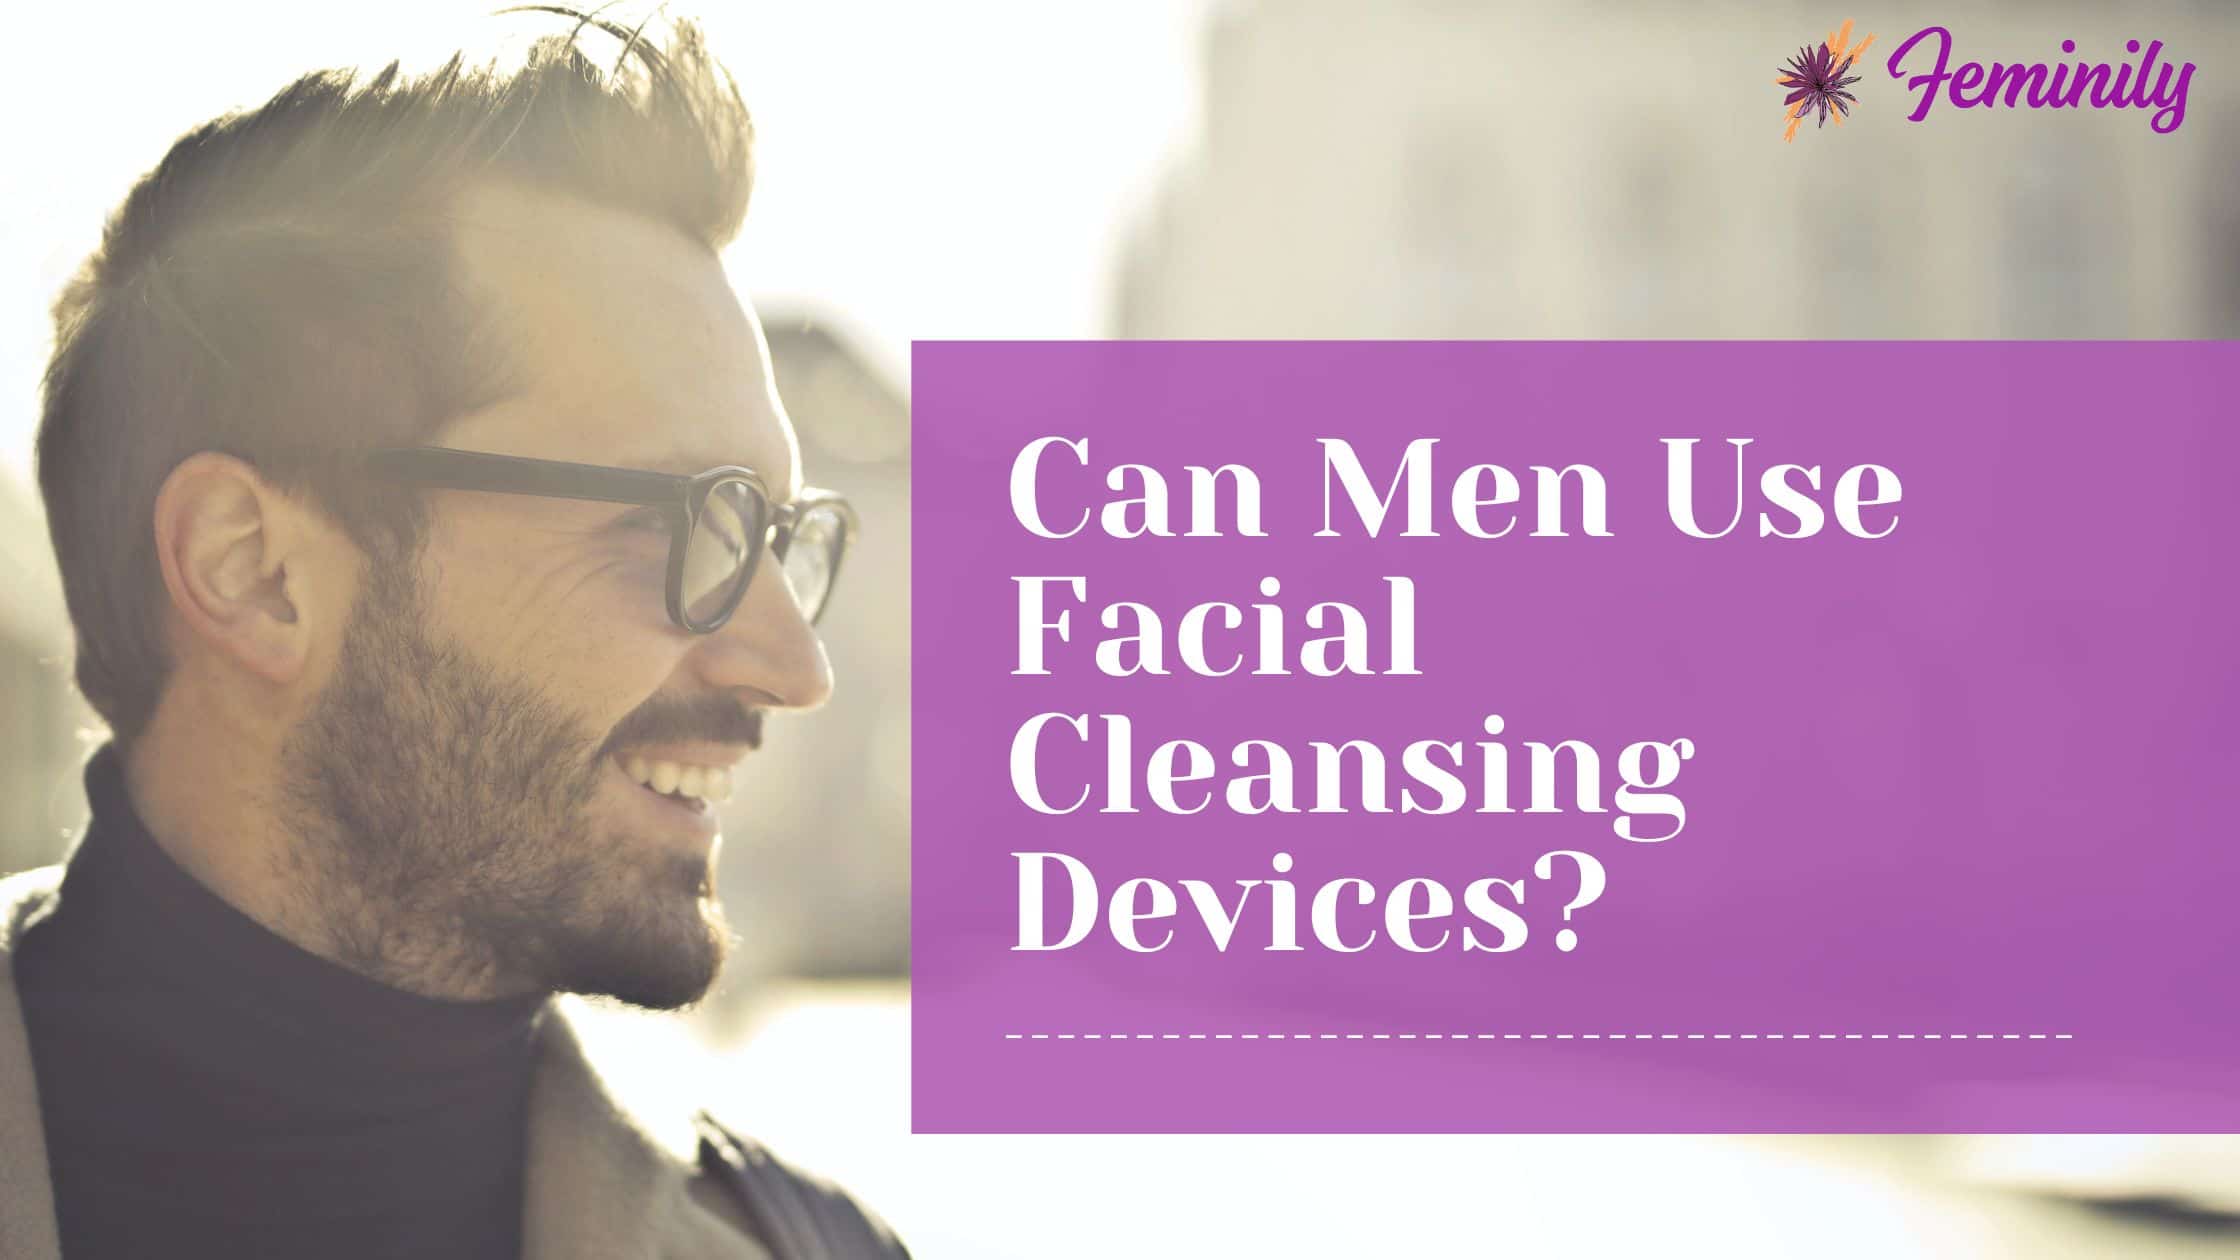 Can men use facial cleansing devices